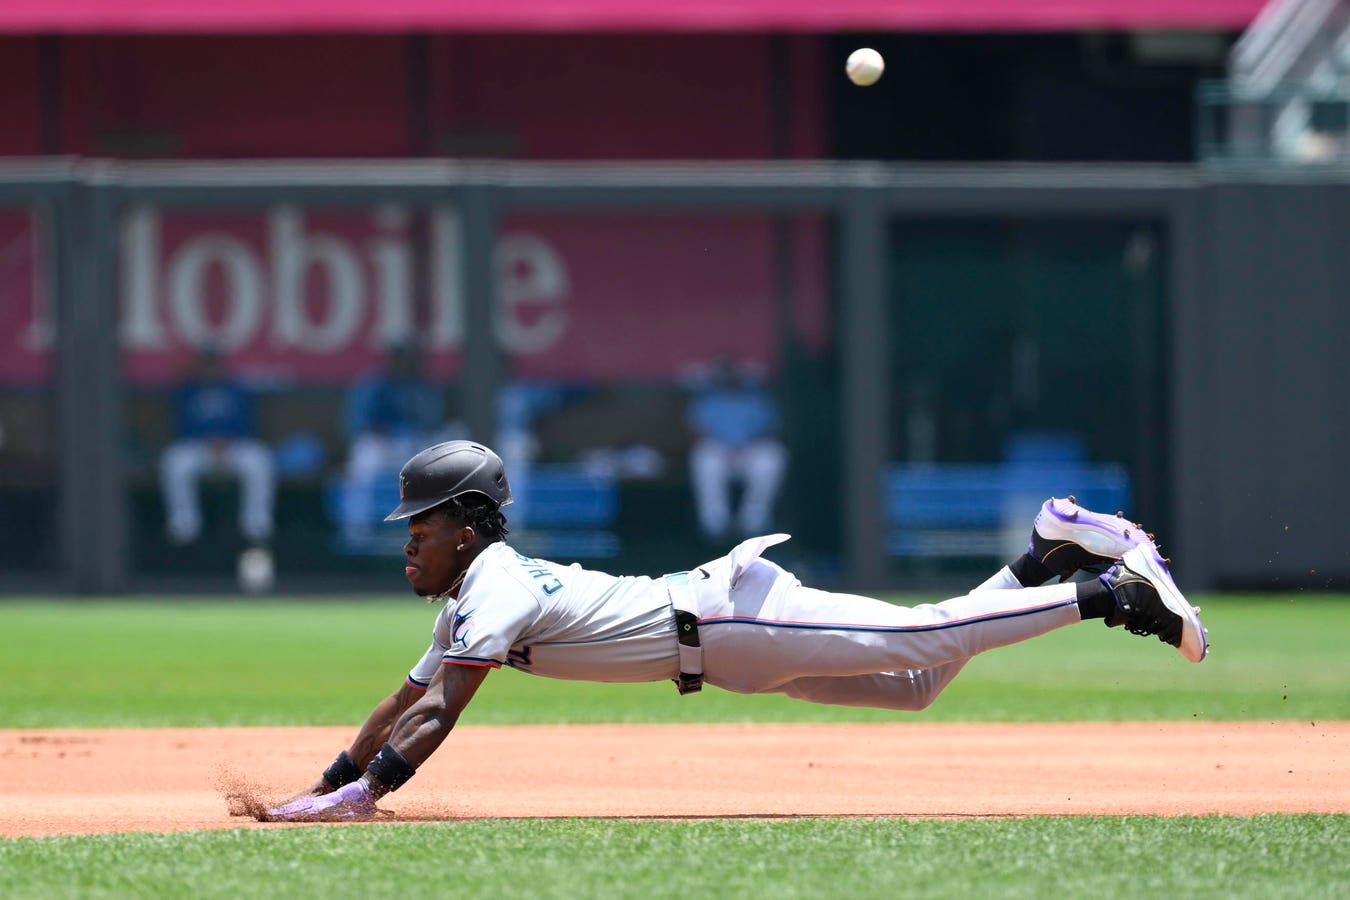 Jazz Chisholm Jr. Is The Miami Marlins’ Best Trade Chip